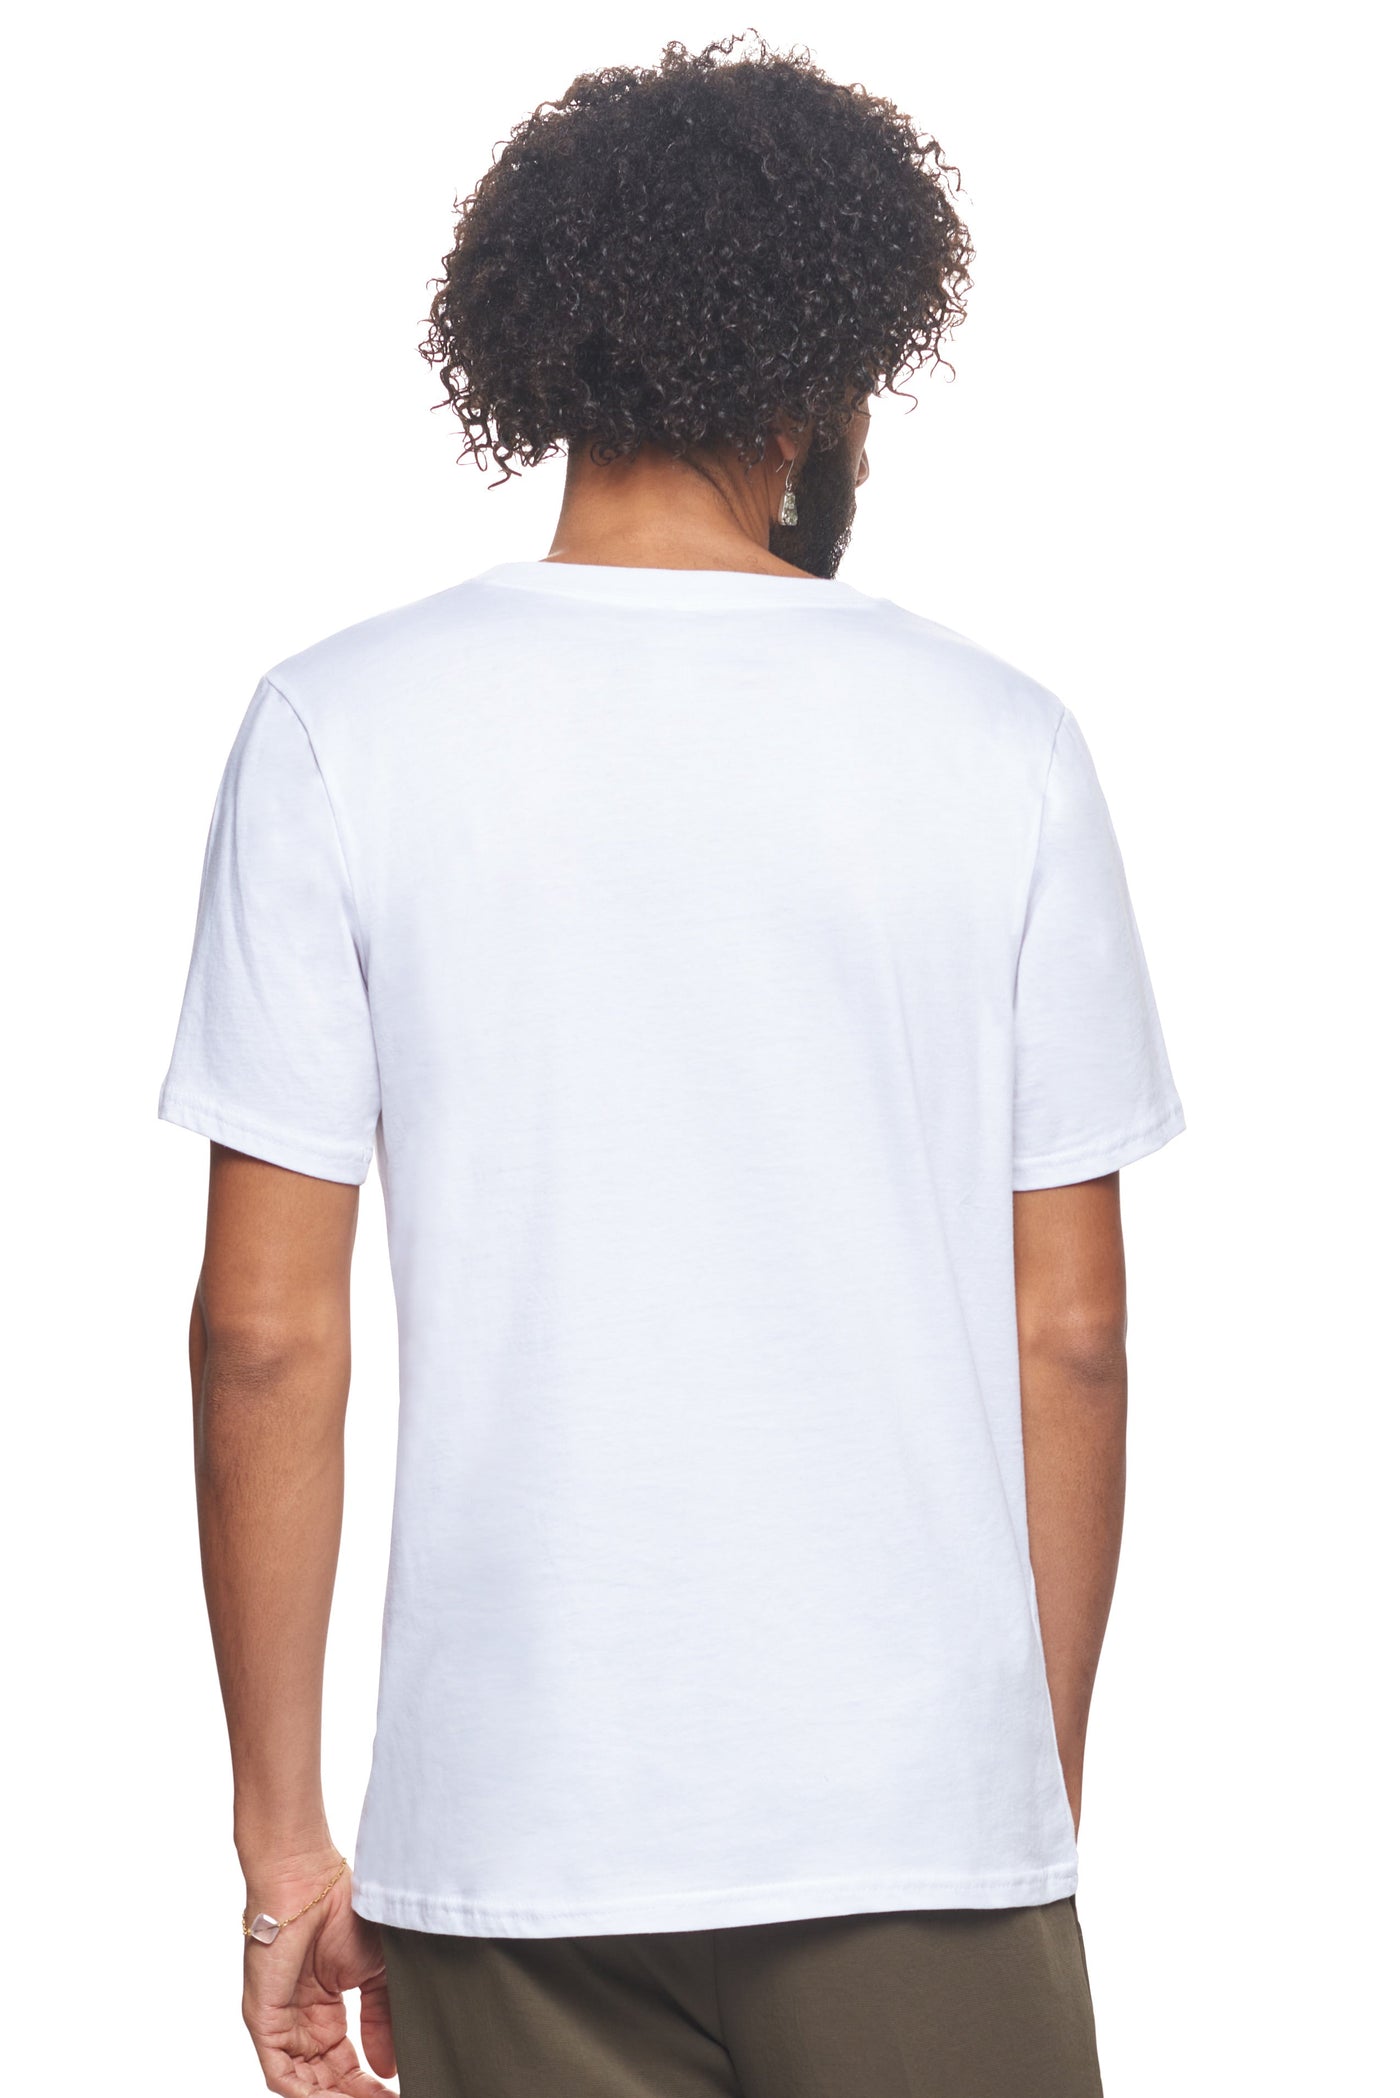 Expert Brand Retail Organic Cotton T-Shirt Made in USA Men's White 3#color_white